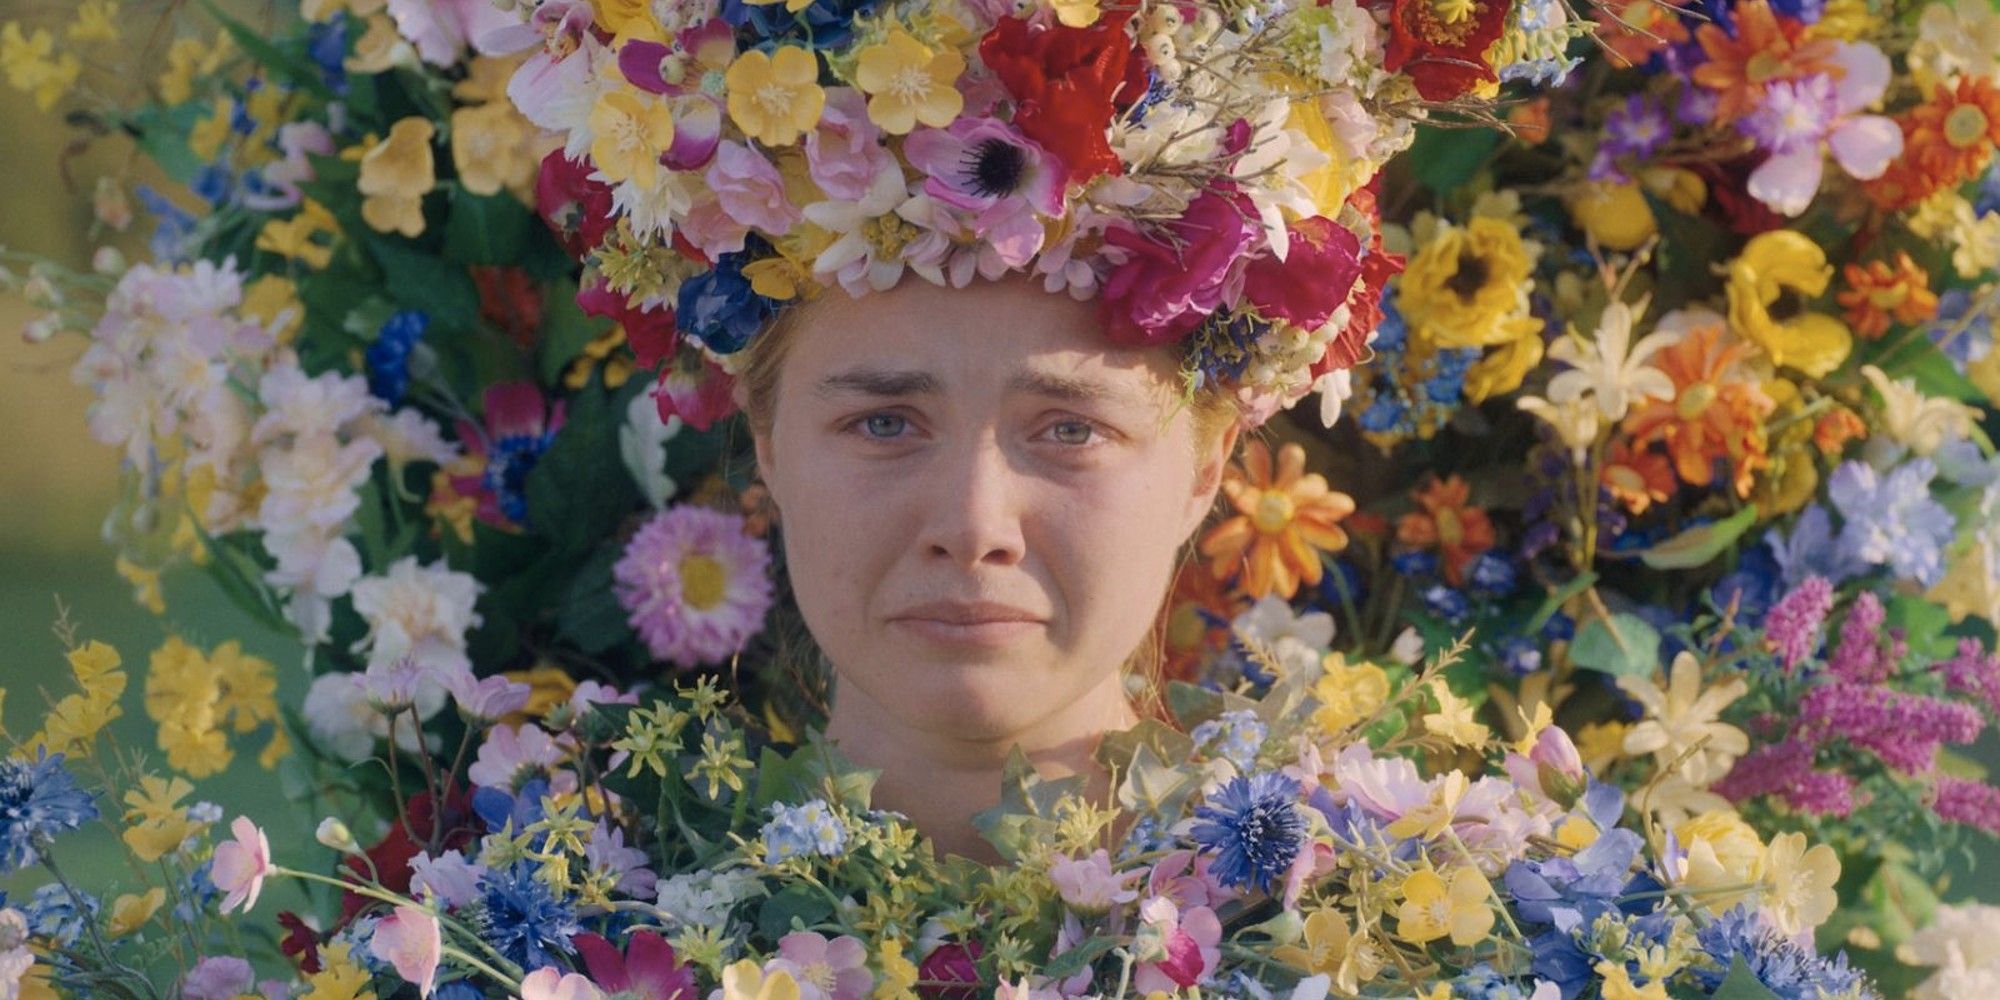 Florence Pugh pouting while surrounded with flowers in 'Midsommar'